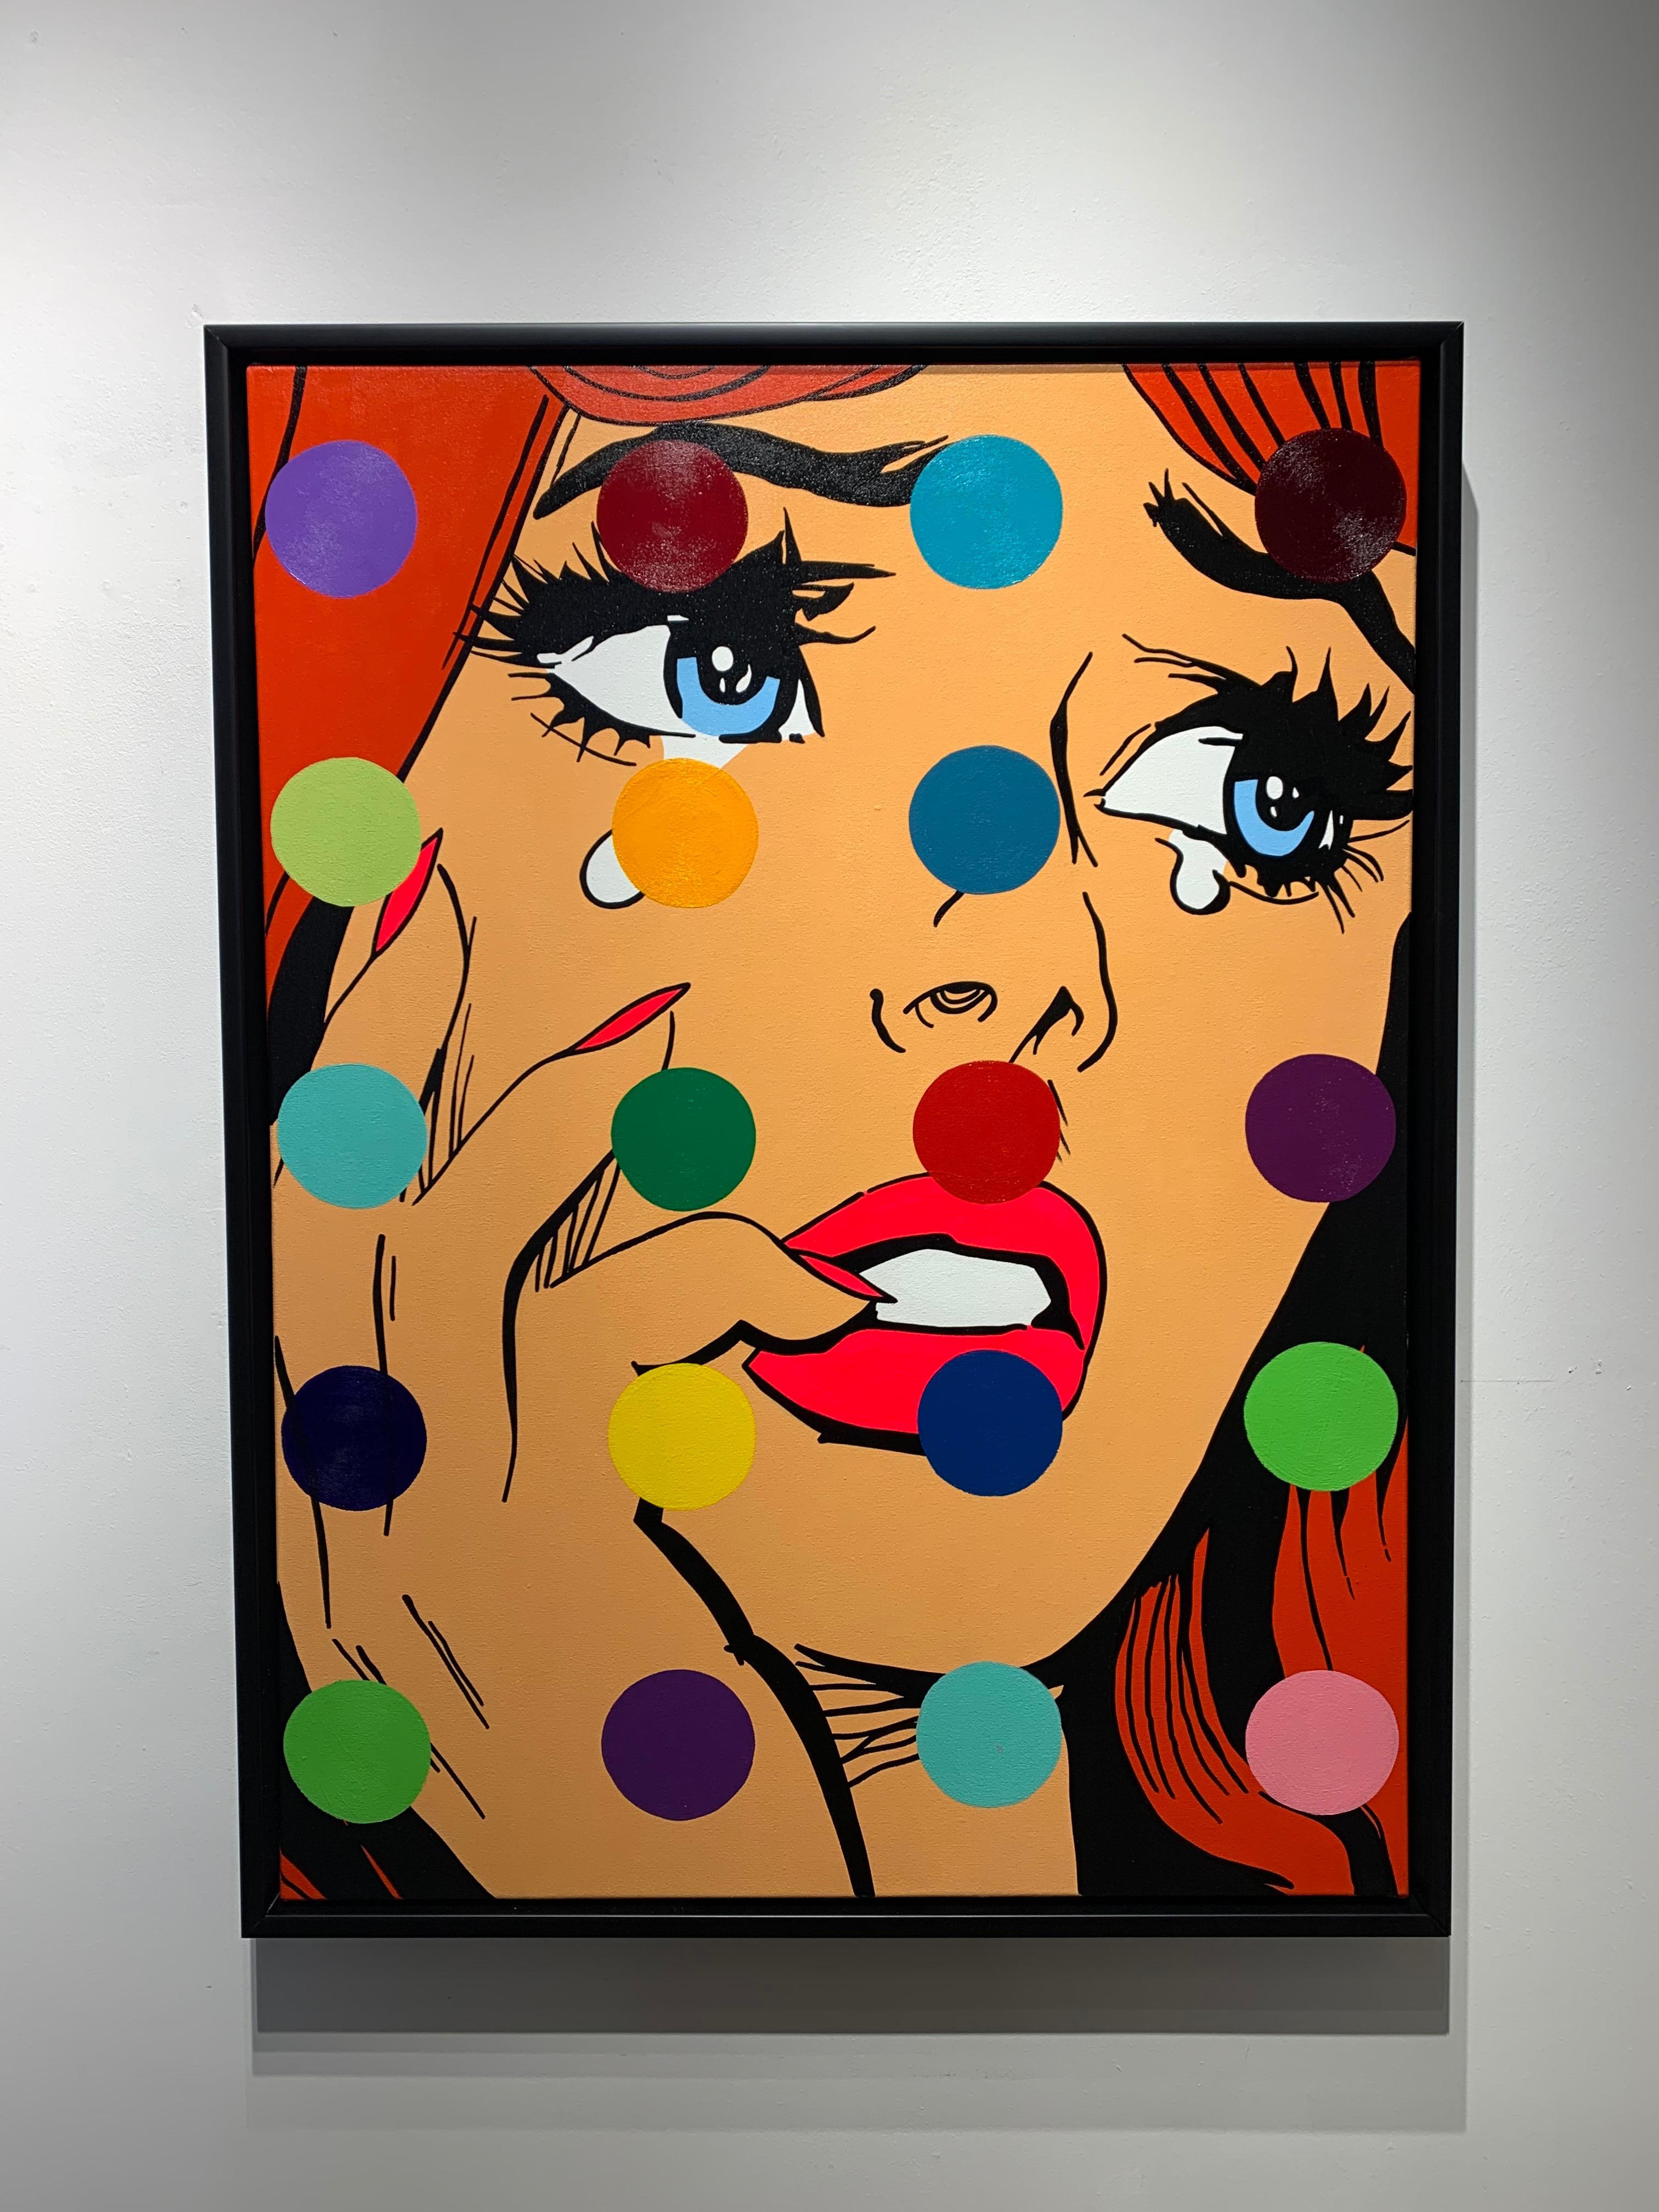 A. Gomez
Disco Dreams
Acrylic and Oil on Canvas
40" x 30"







A. Gomez Pop Art
A. Gomez Oil Painting 
A. Gomez Acrylic Painting
Pop Art
Oil Paint
Acrylic Paint 
Pop Art Girl
Crying
Polka Dot
Bright Colors